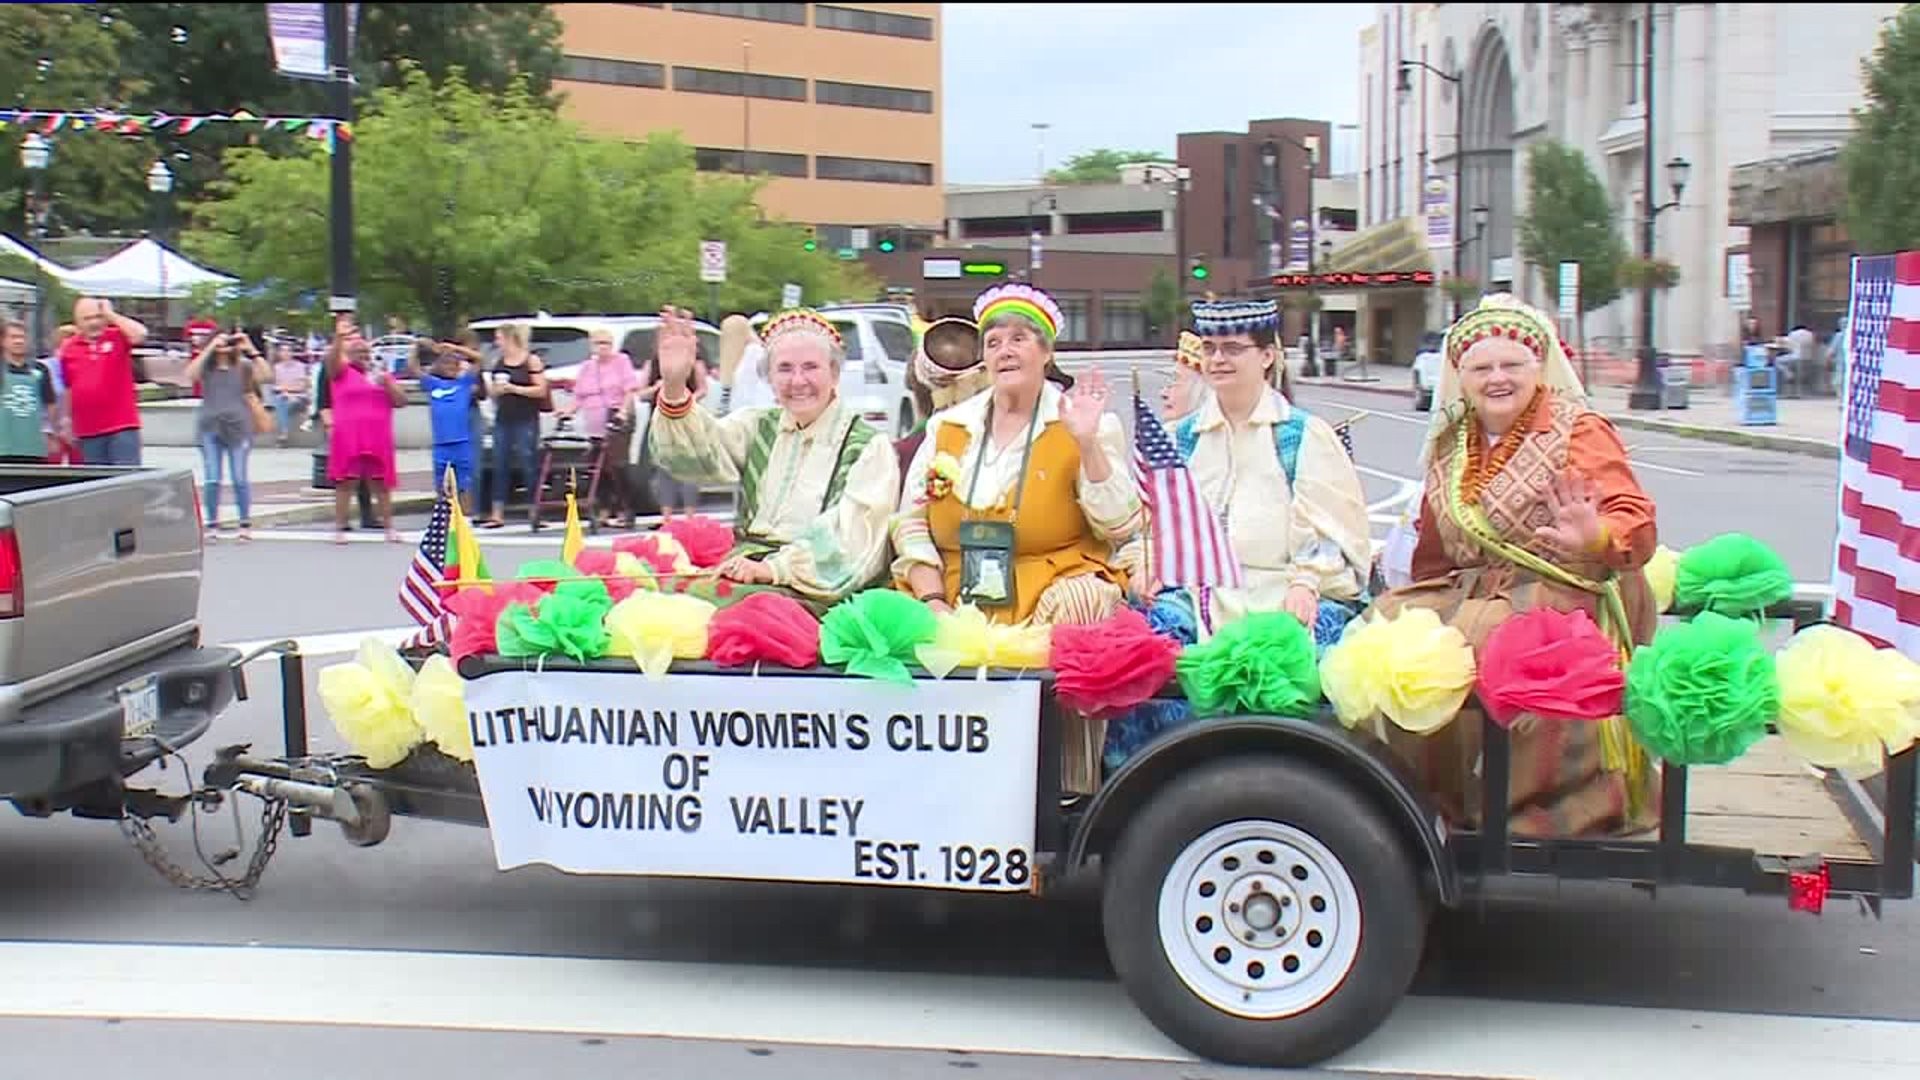 Multicultural Parade and Festival in Wilkes-Barre